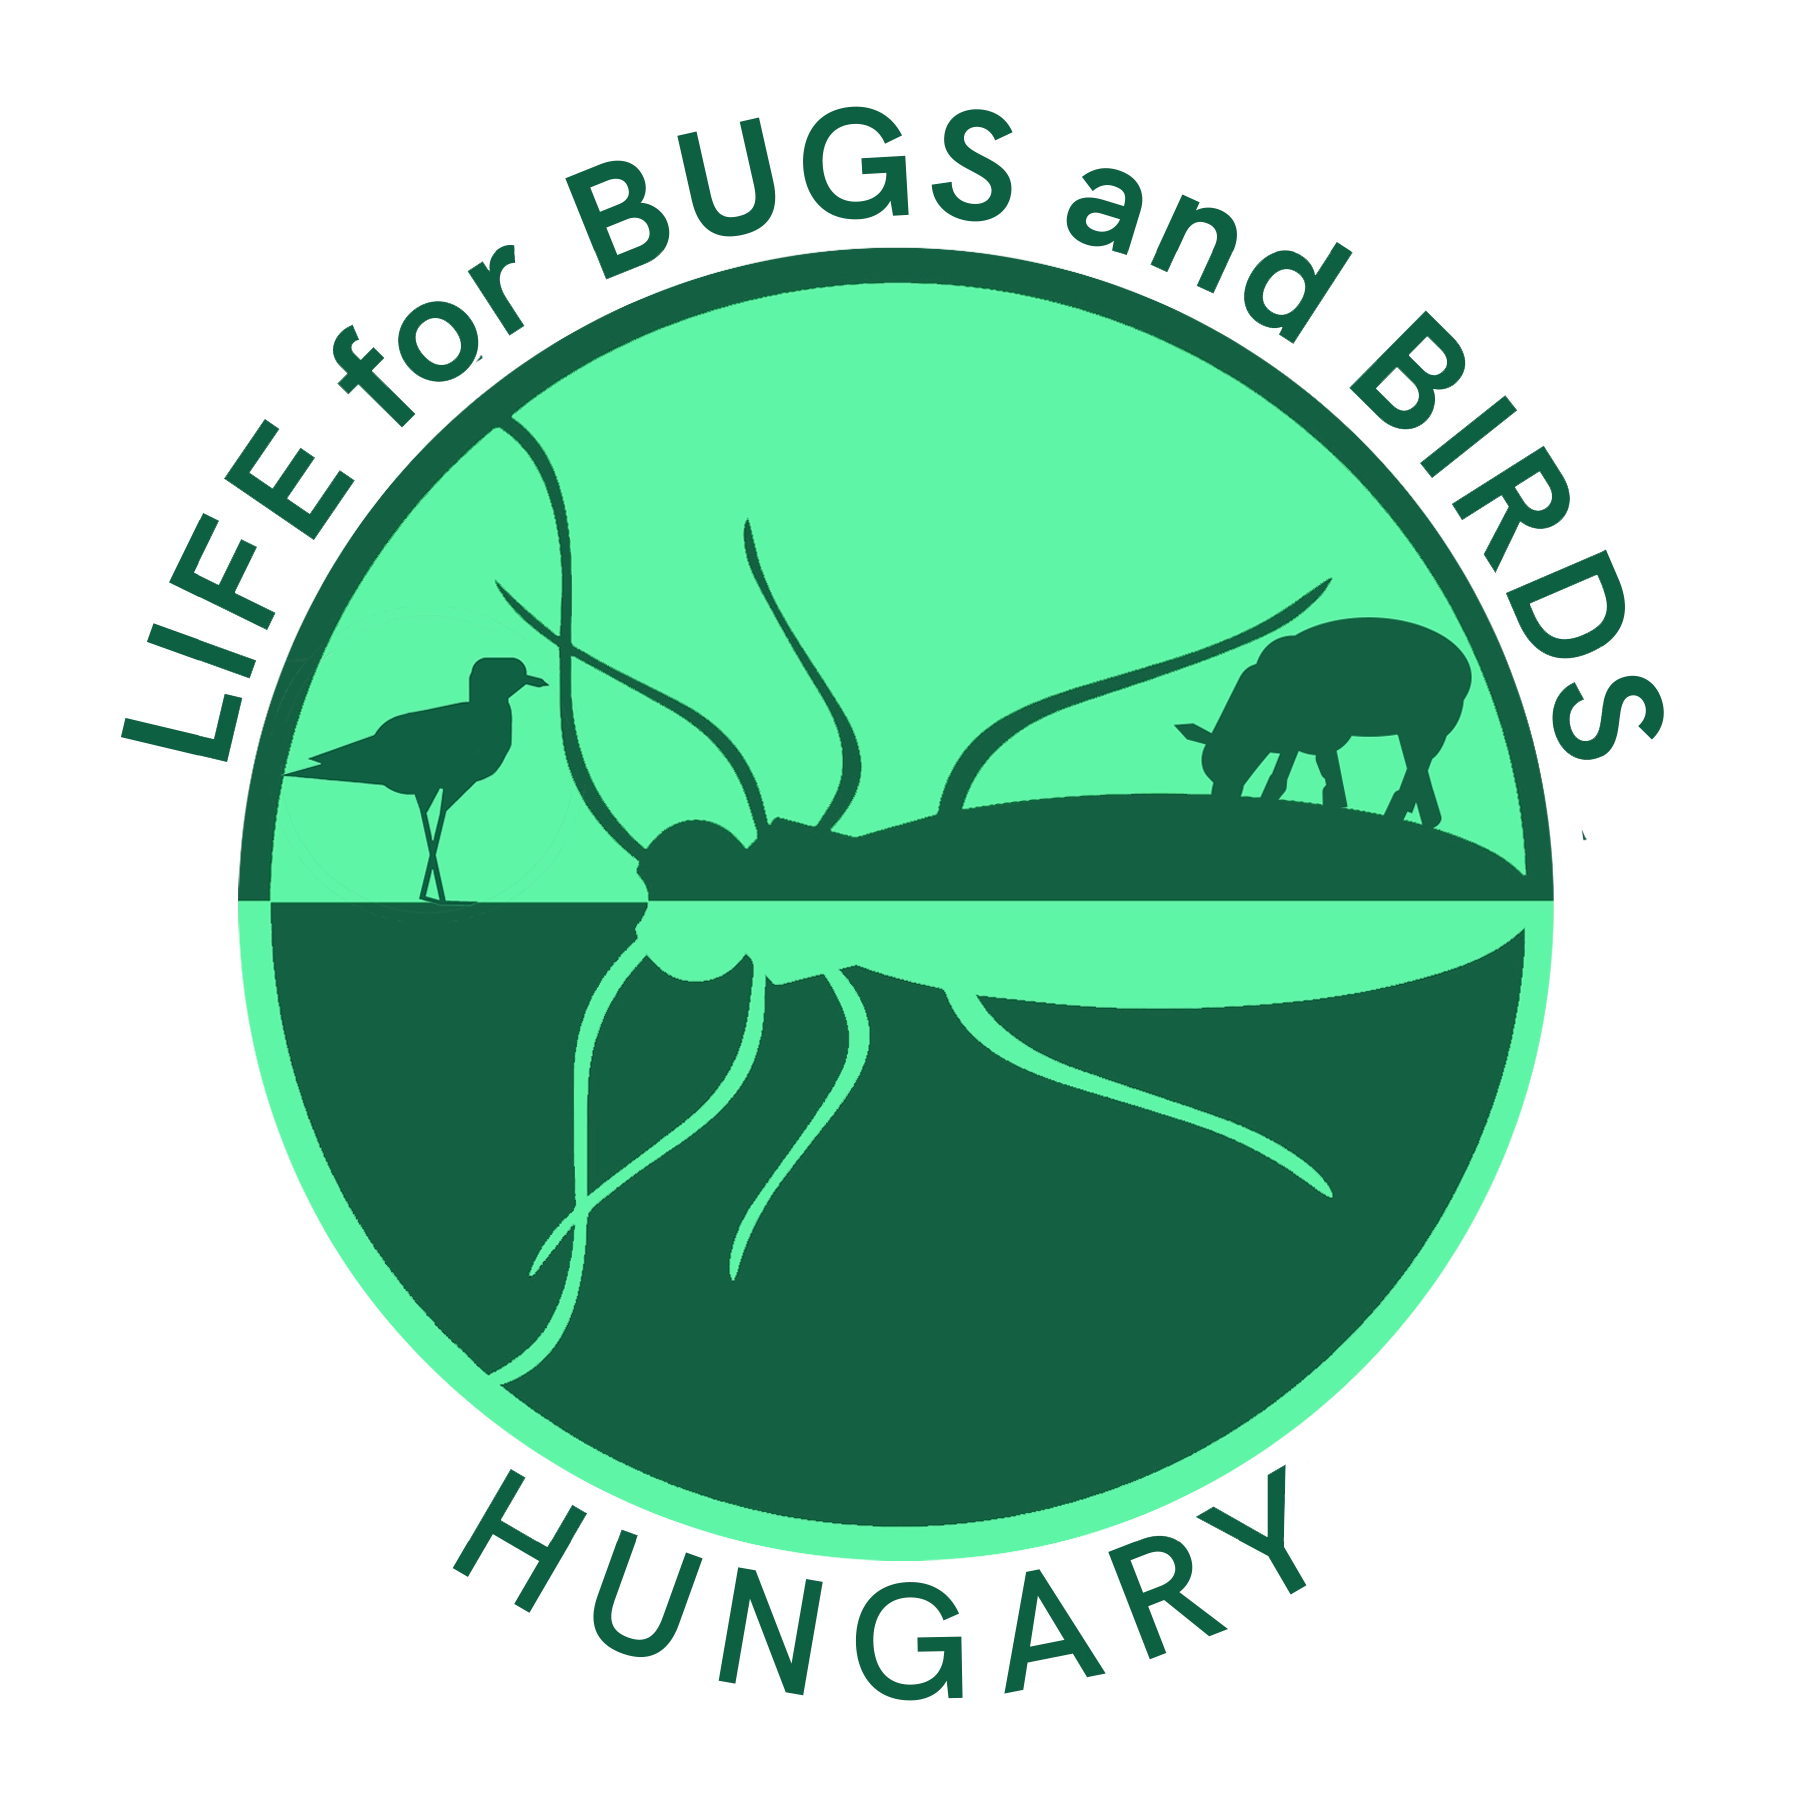 LIFE for BUGS & BIRDS